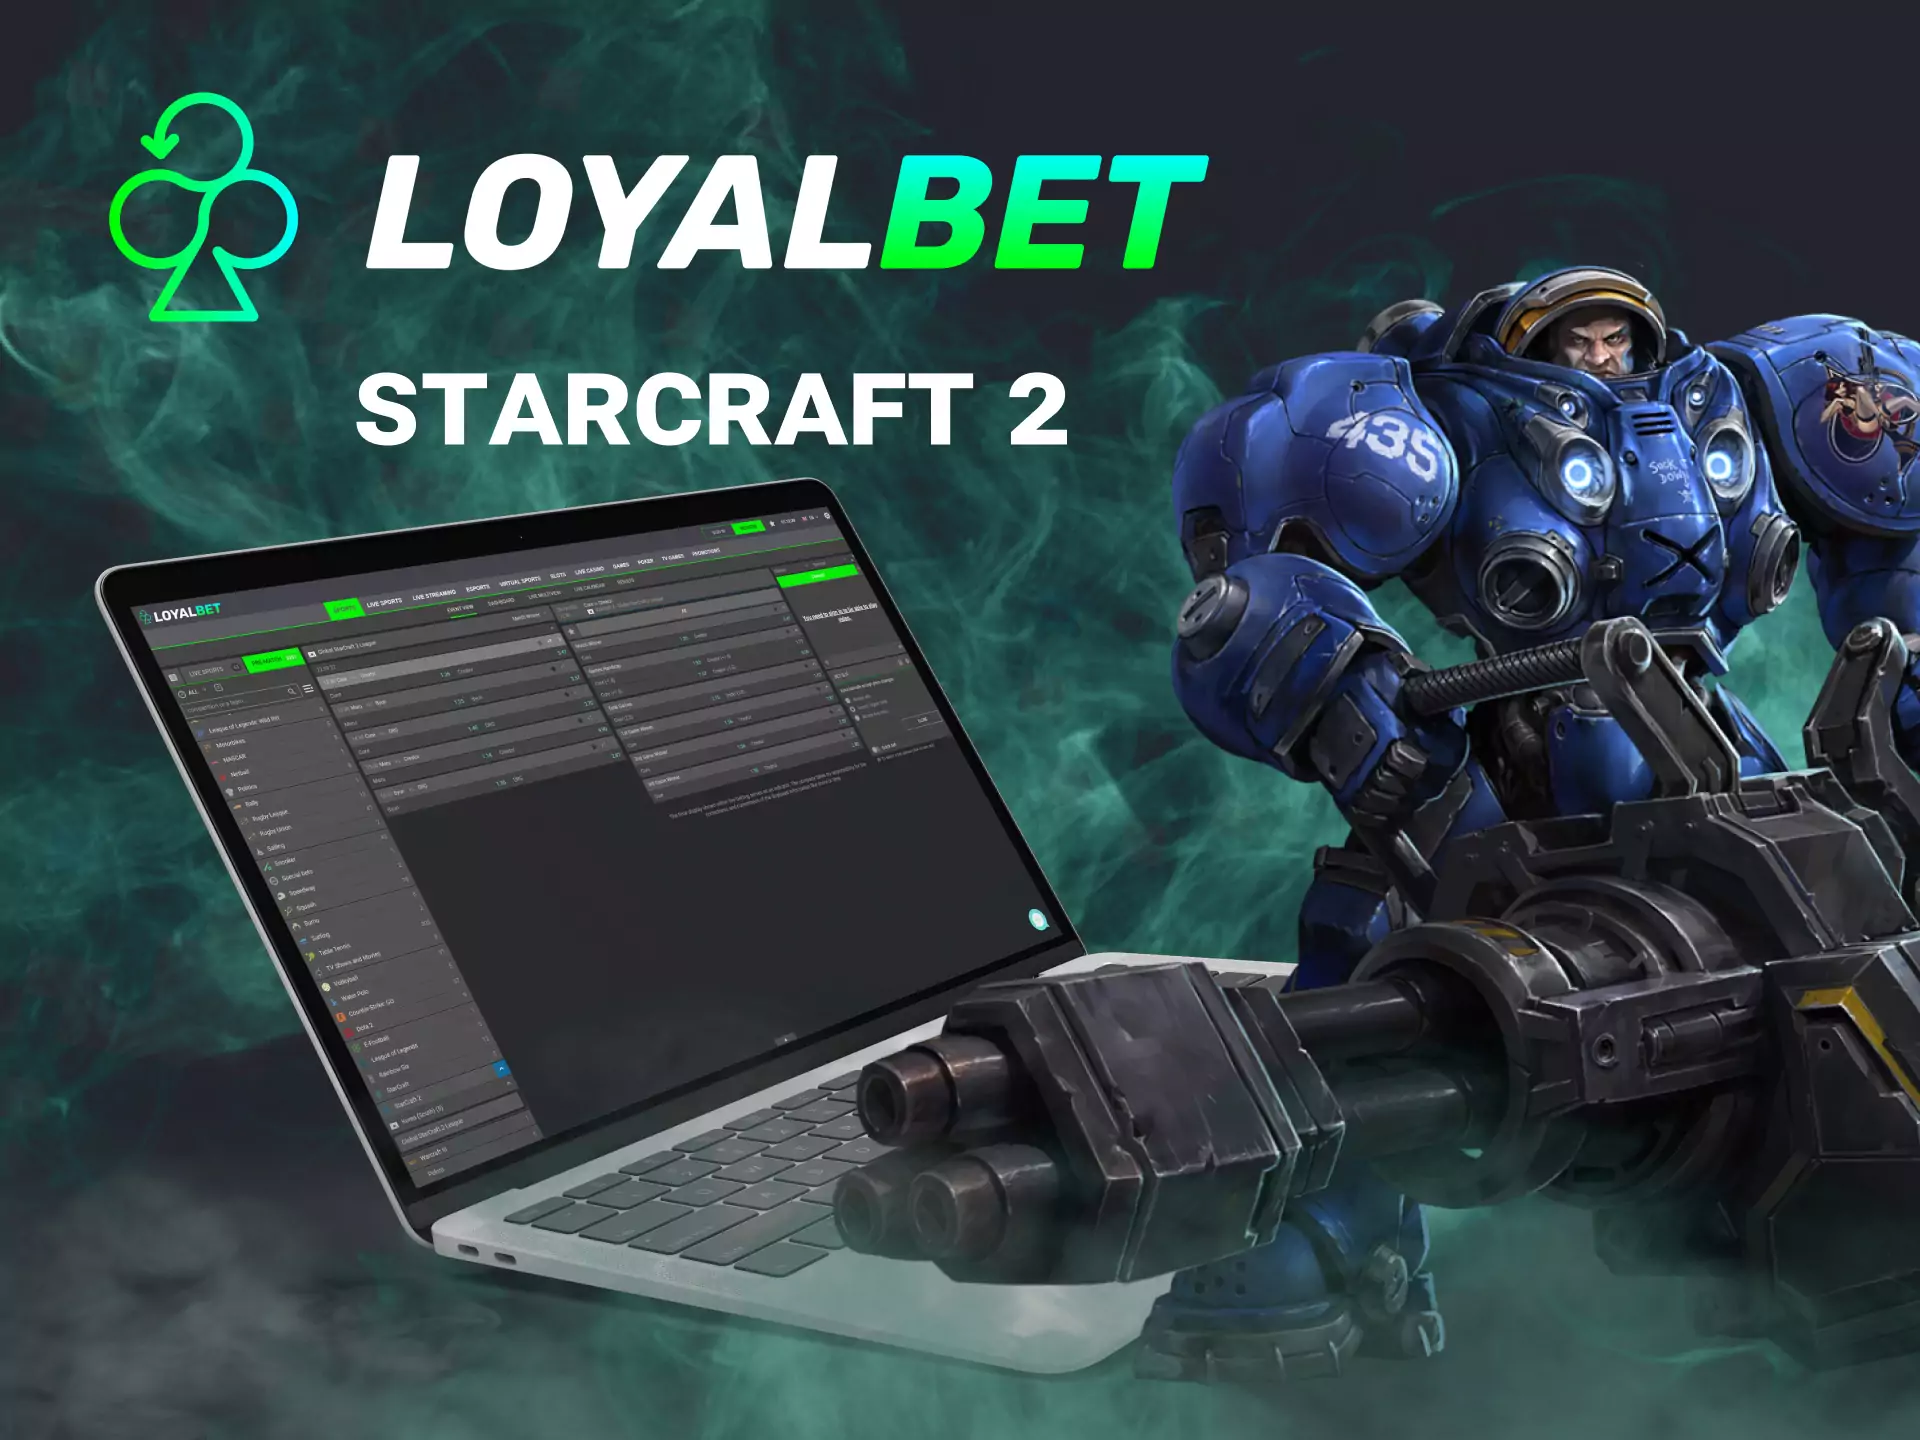 Indian users of Loyalbet prefer the Starcraft 2 events for betting.